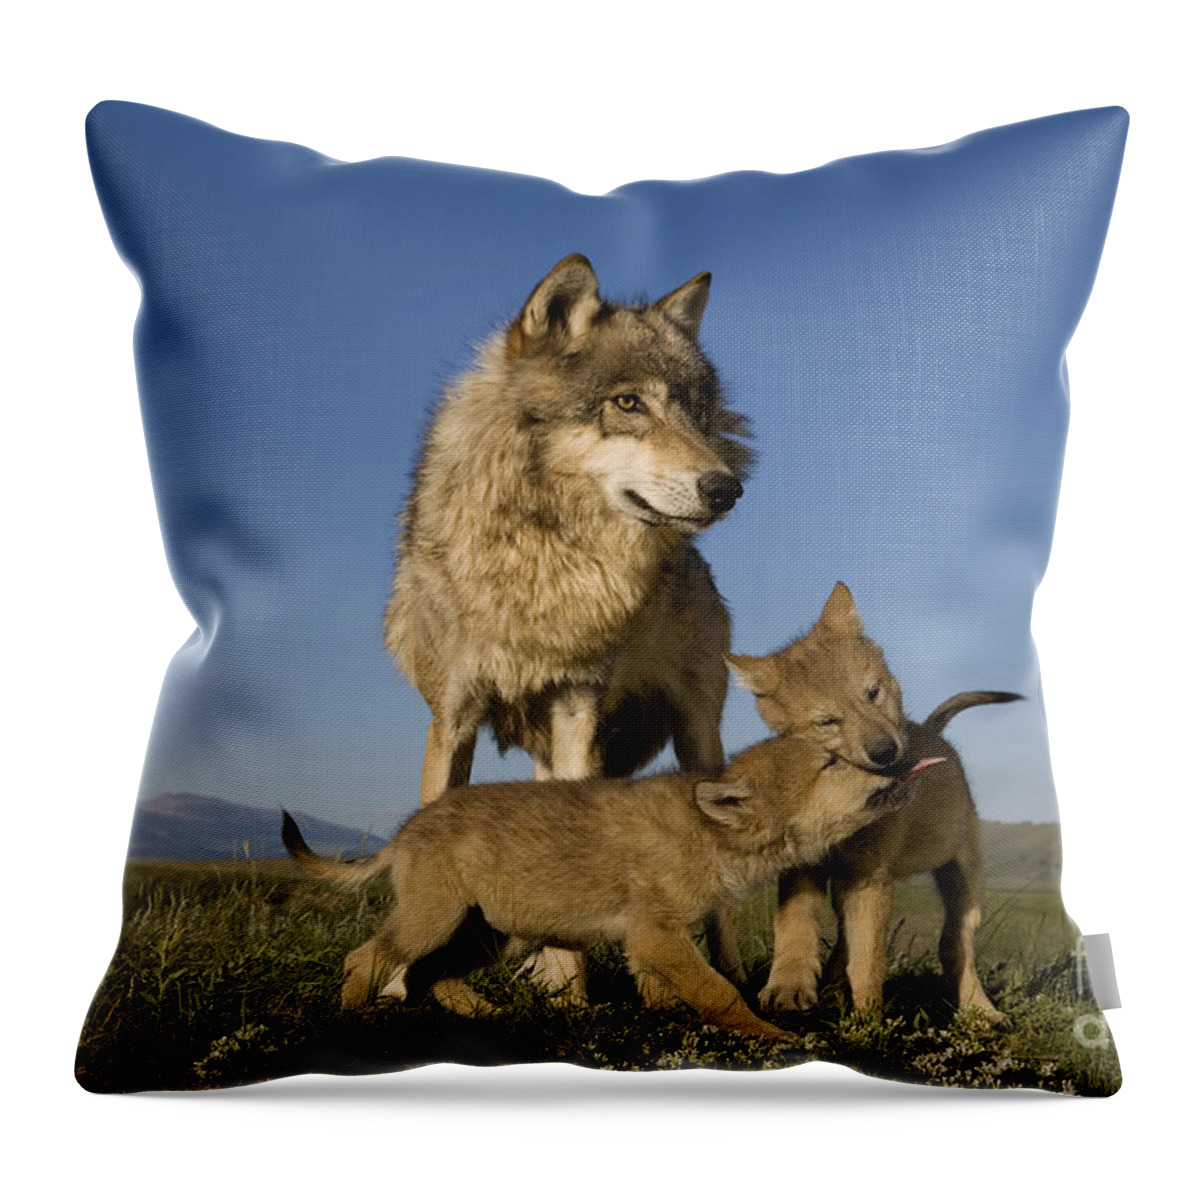 Gray Wolf Throw Pillow featuring the photograph Gray Wolves Playing by Jean-Louis Klein & Marie-Luce Hubert